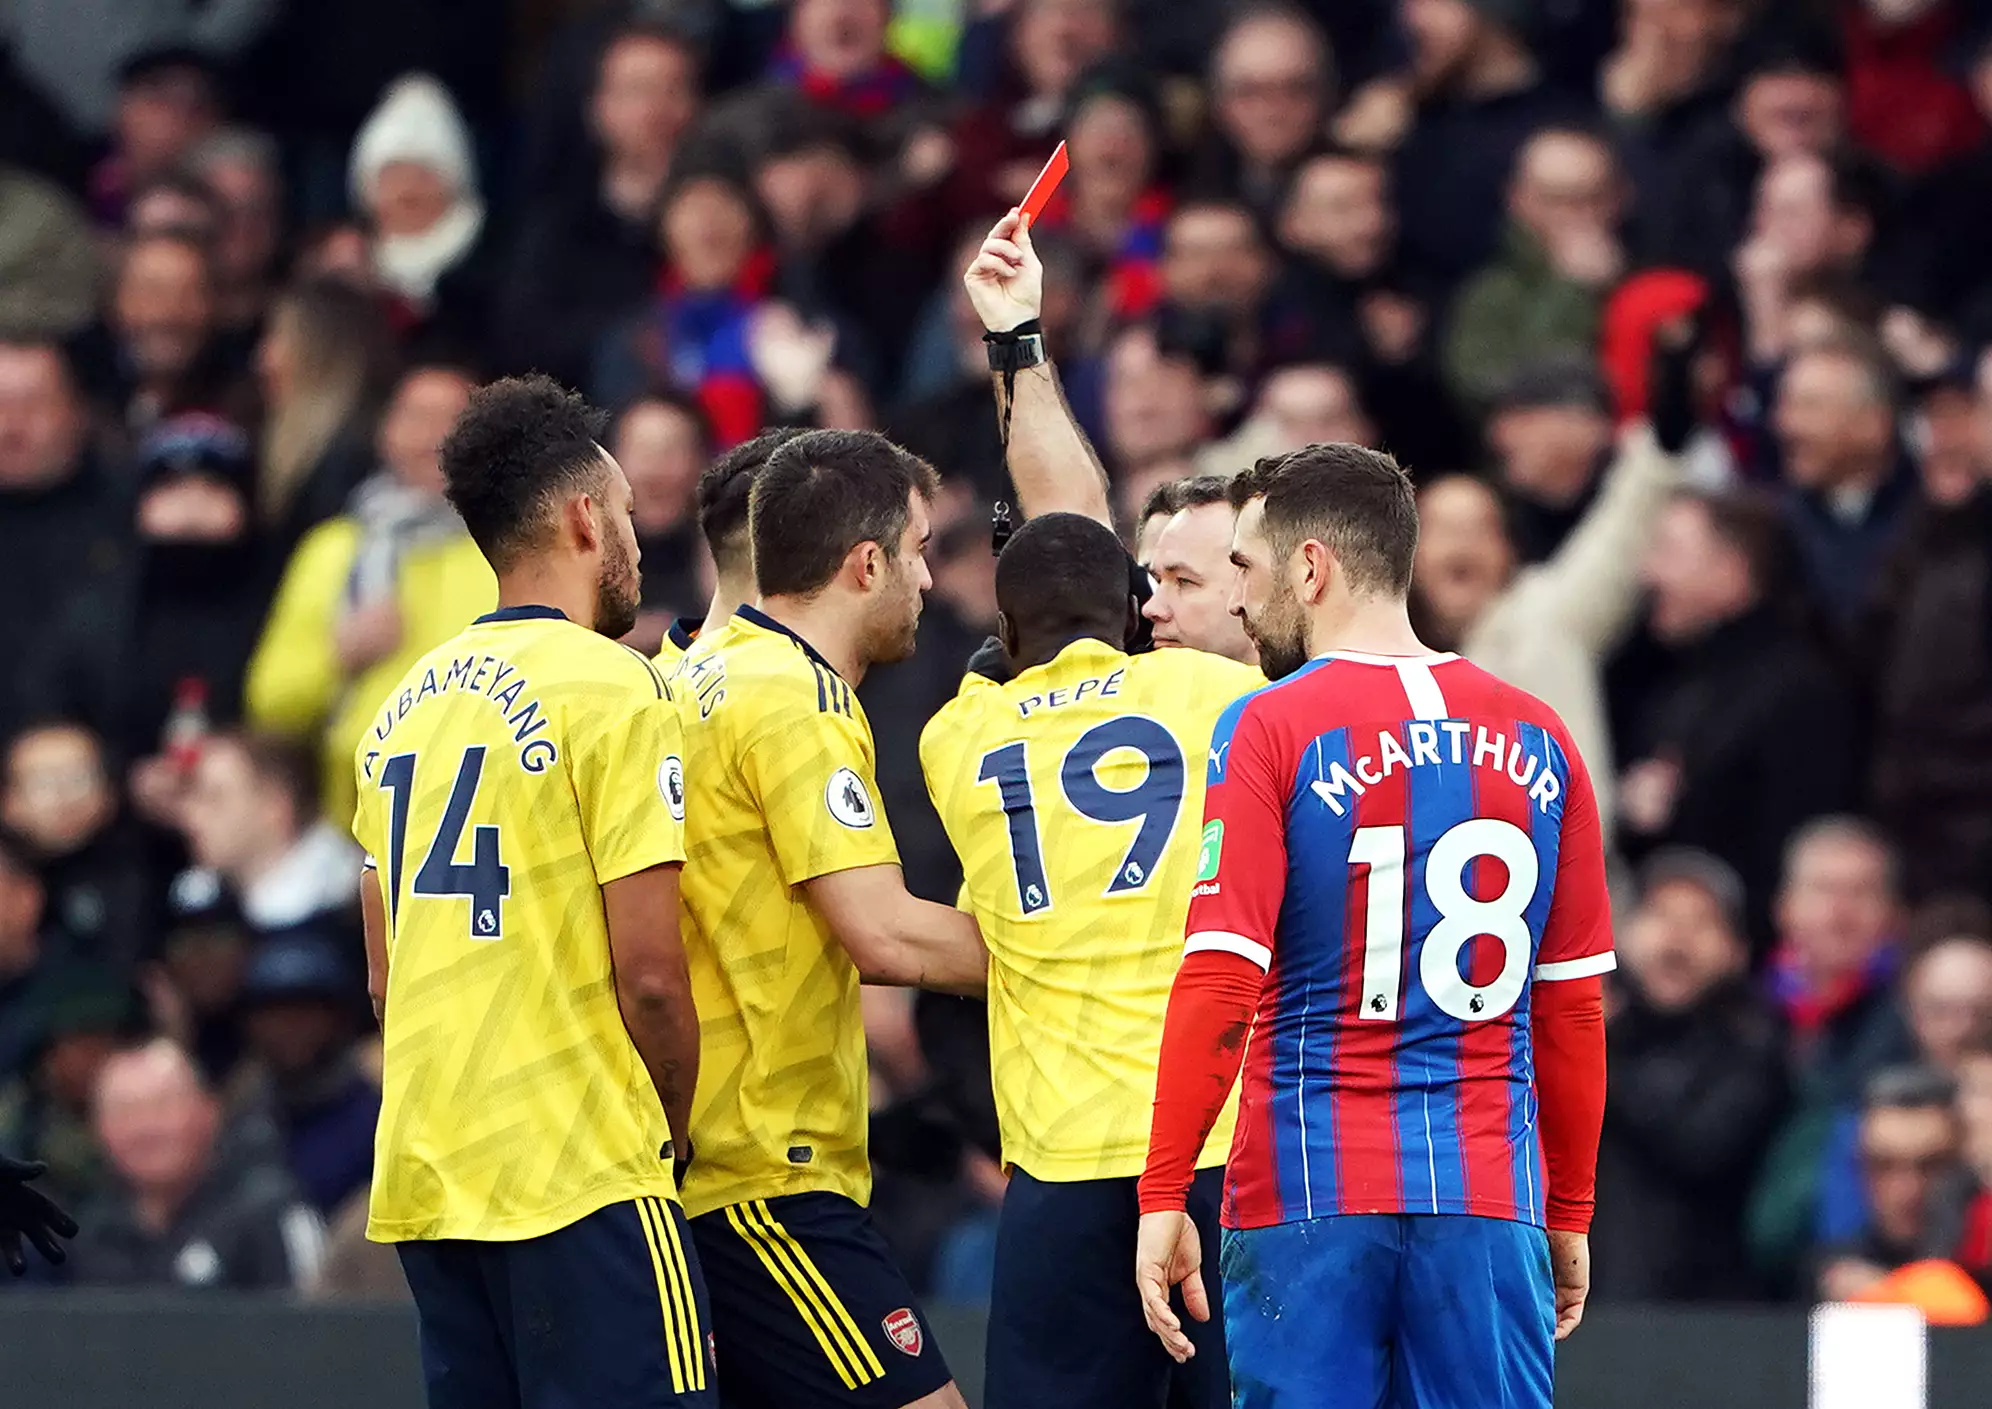 Pierre-Emerick Aubameyang sees red against Crystal Palace. Image: PA Images